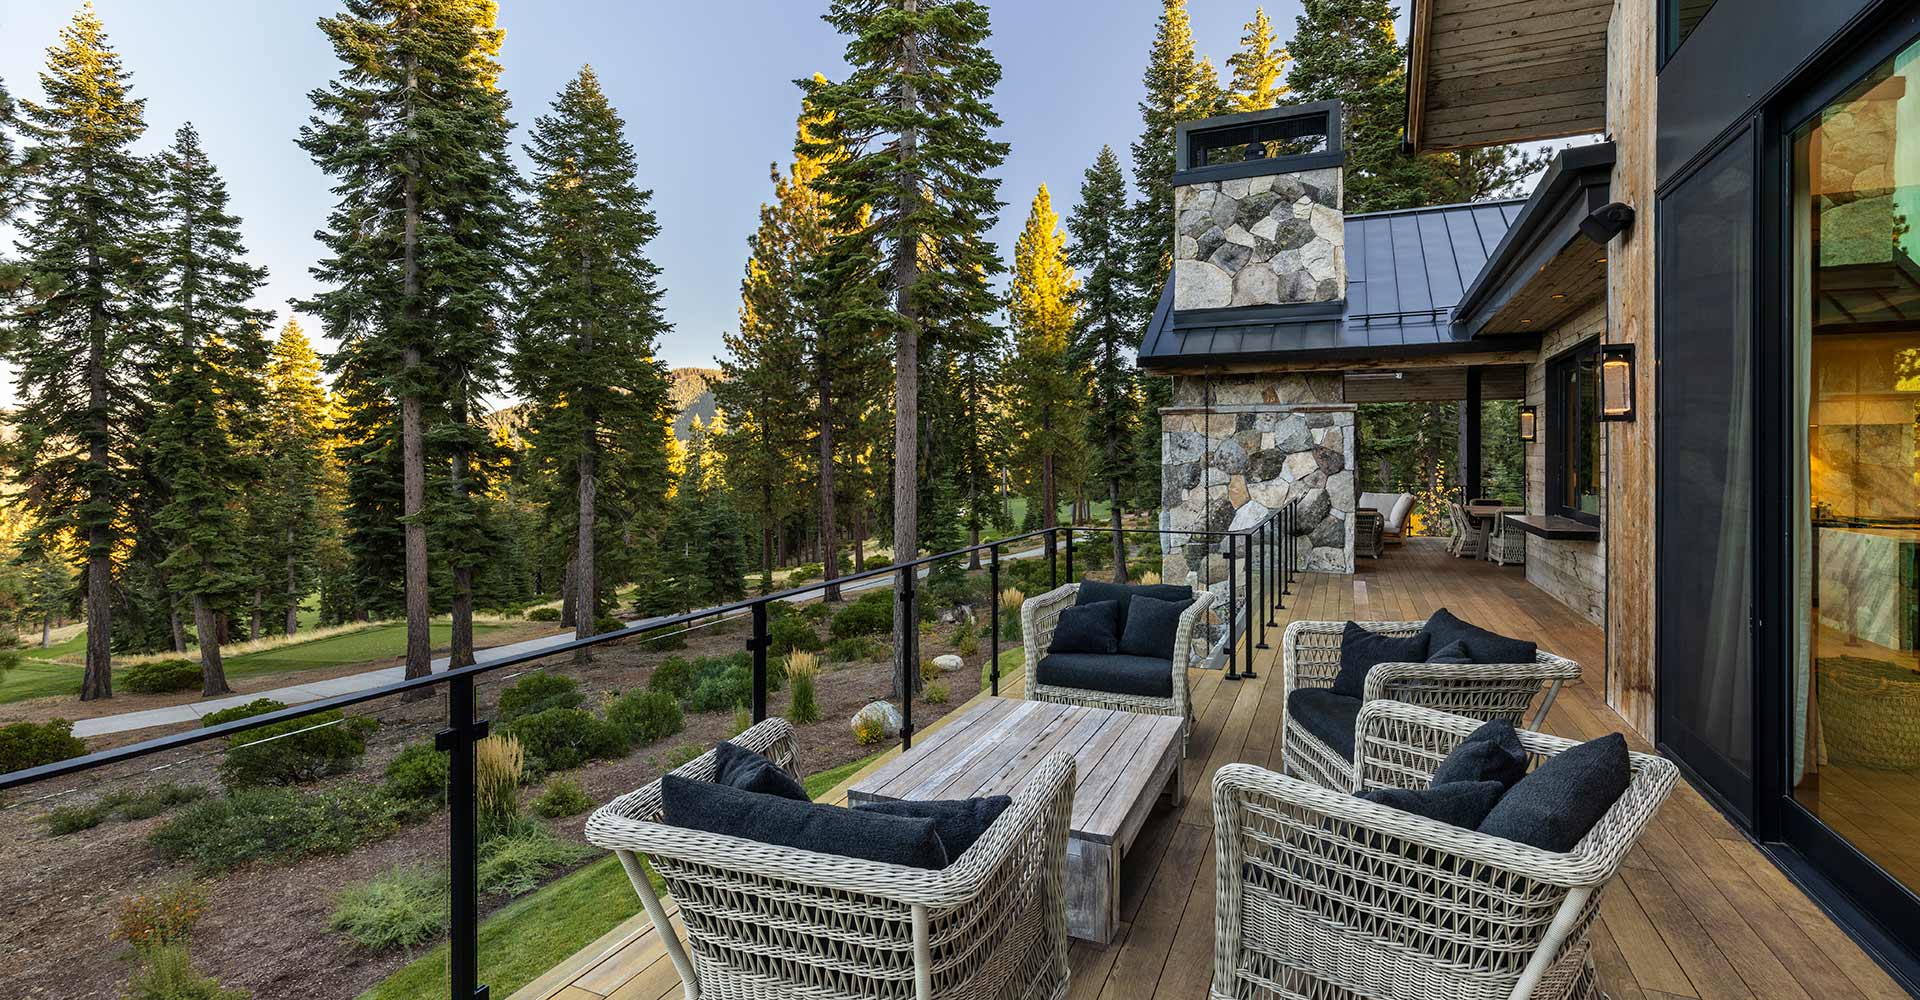 Lake Tahoe luxury homes for sale - 8376 Valhalla Drive